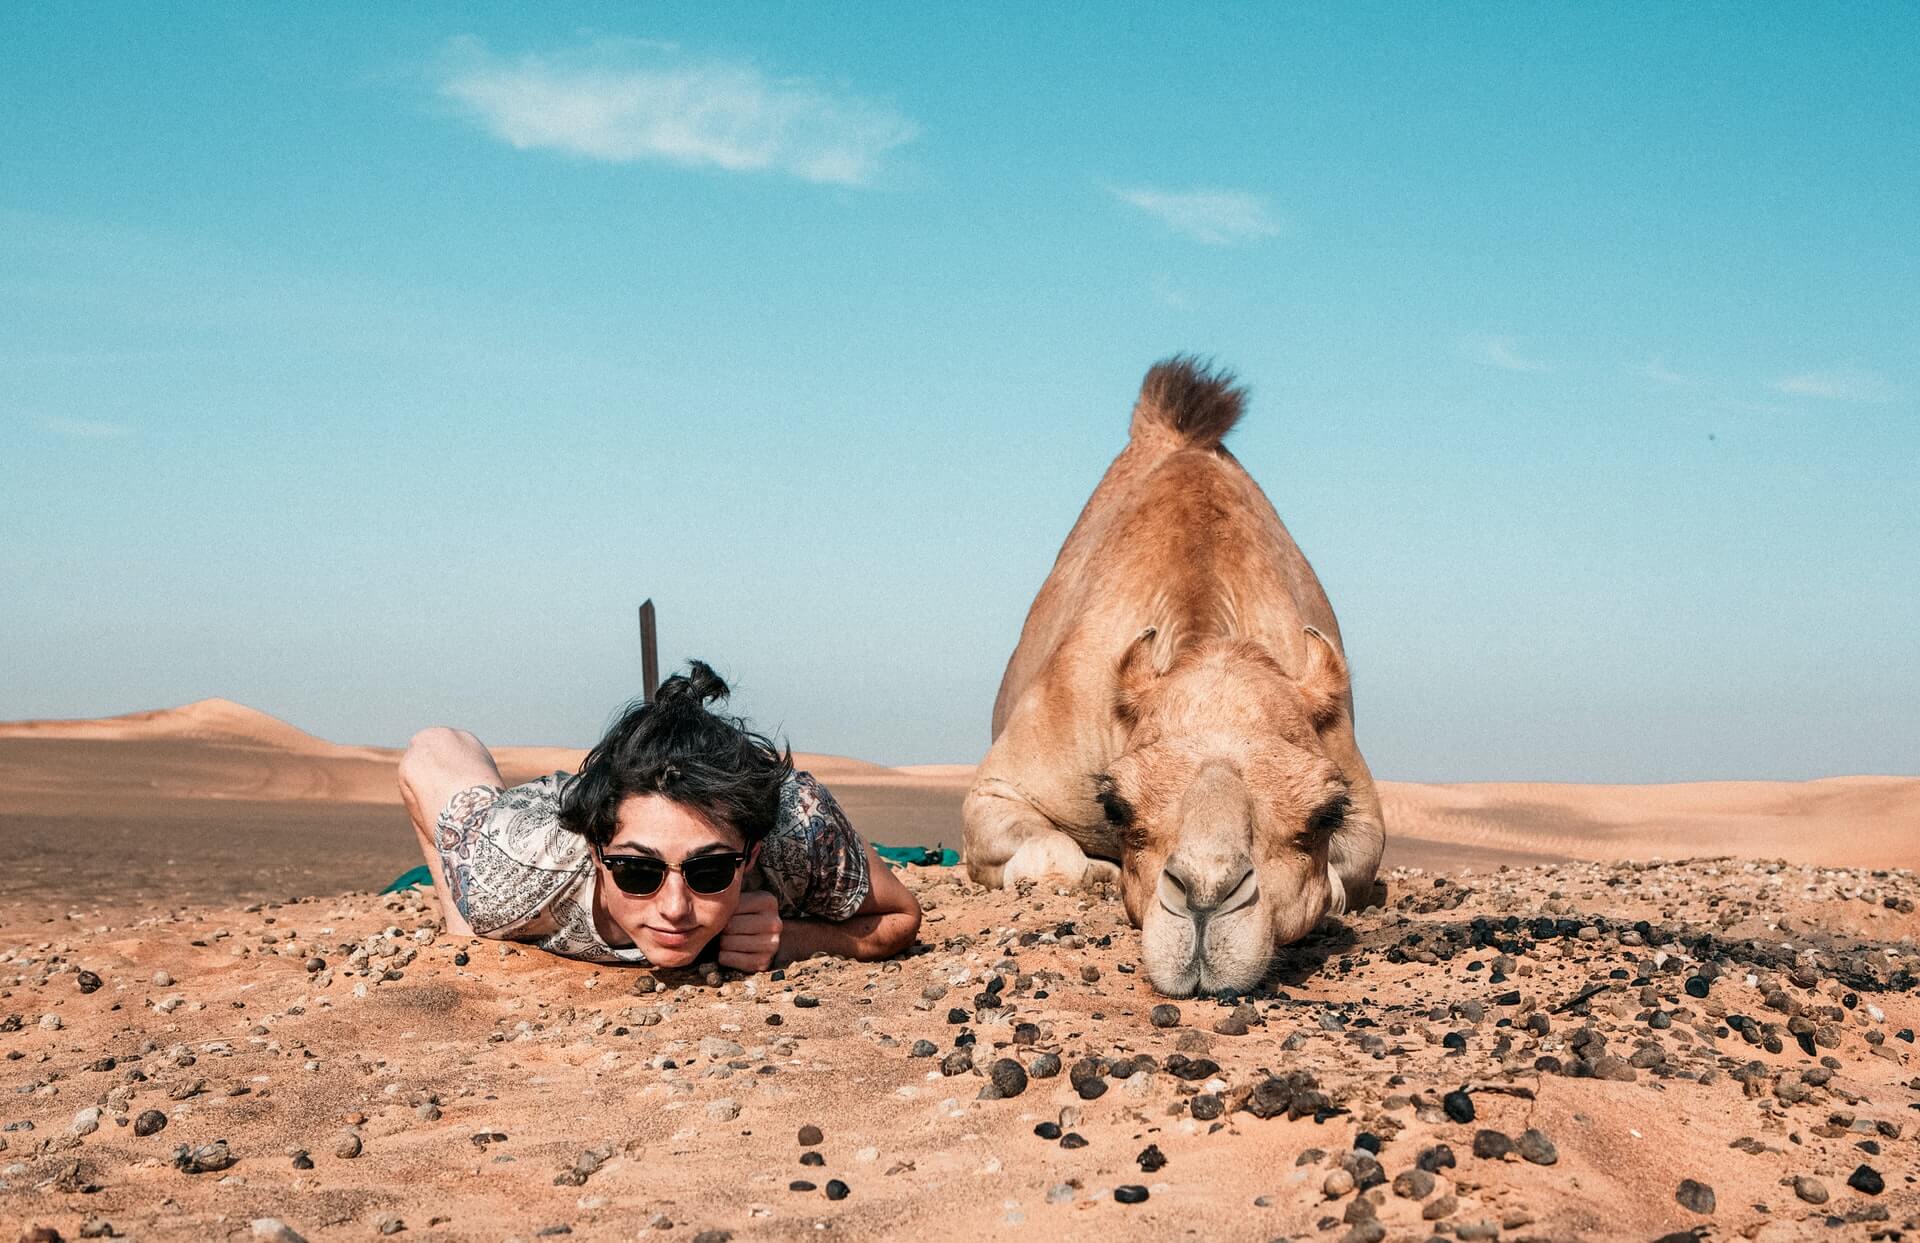 A solo traveller backpacking the Middle East posing with a camel.